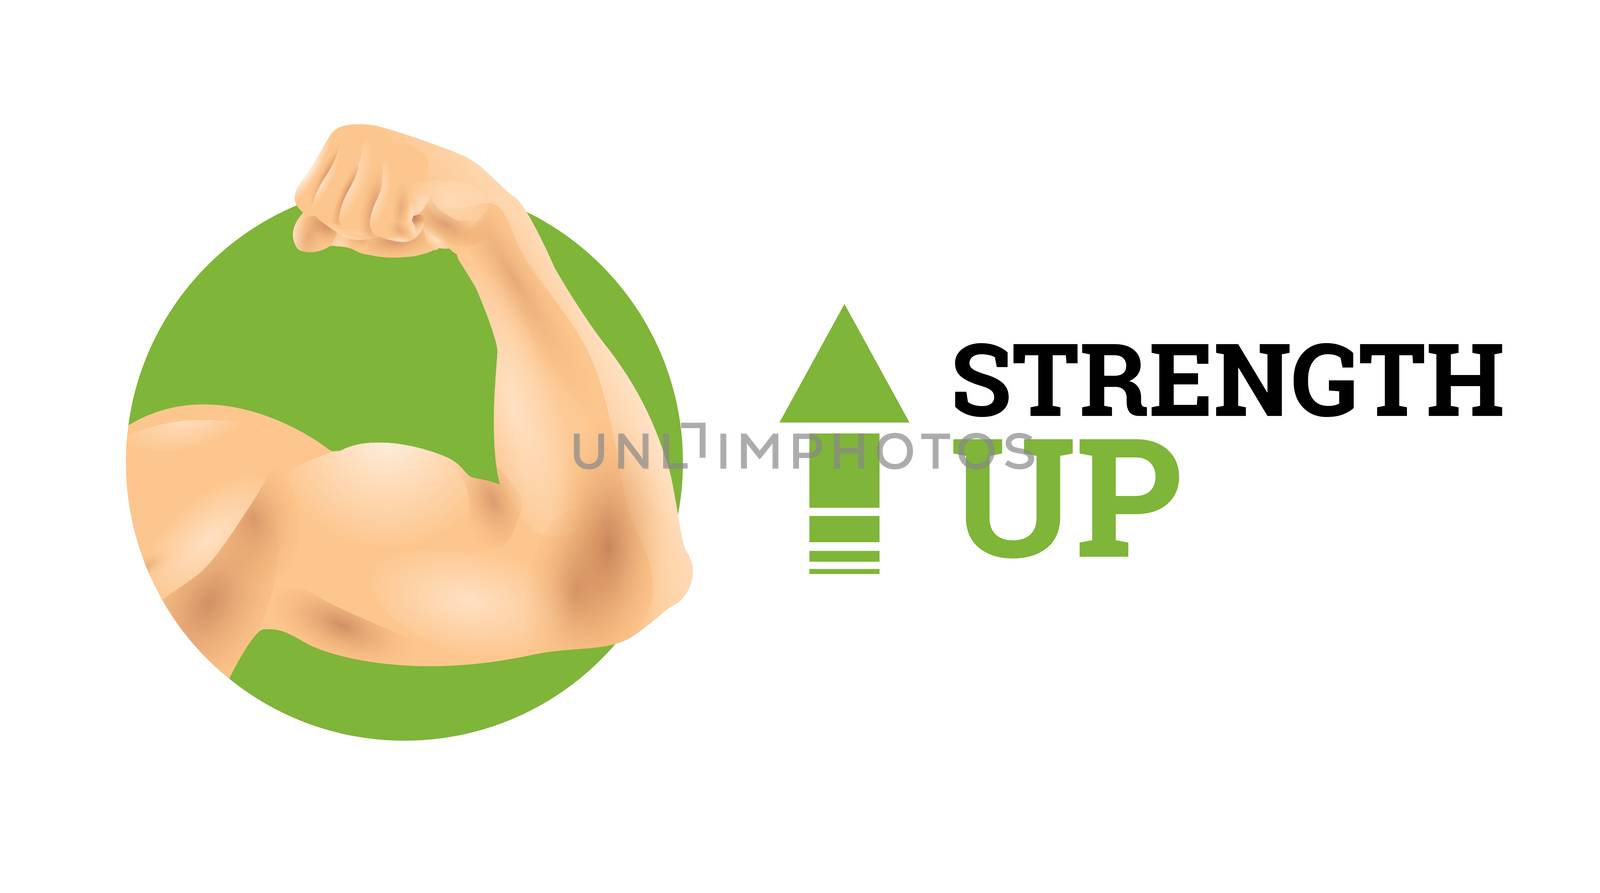 role playing game design interface element biceps strength up skill improve achievment illustration